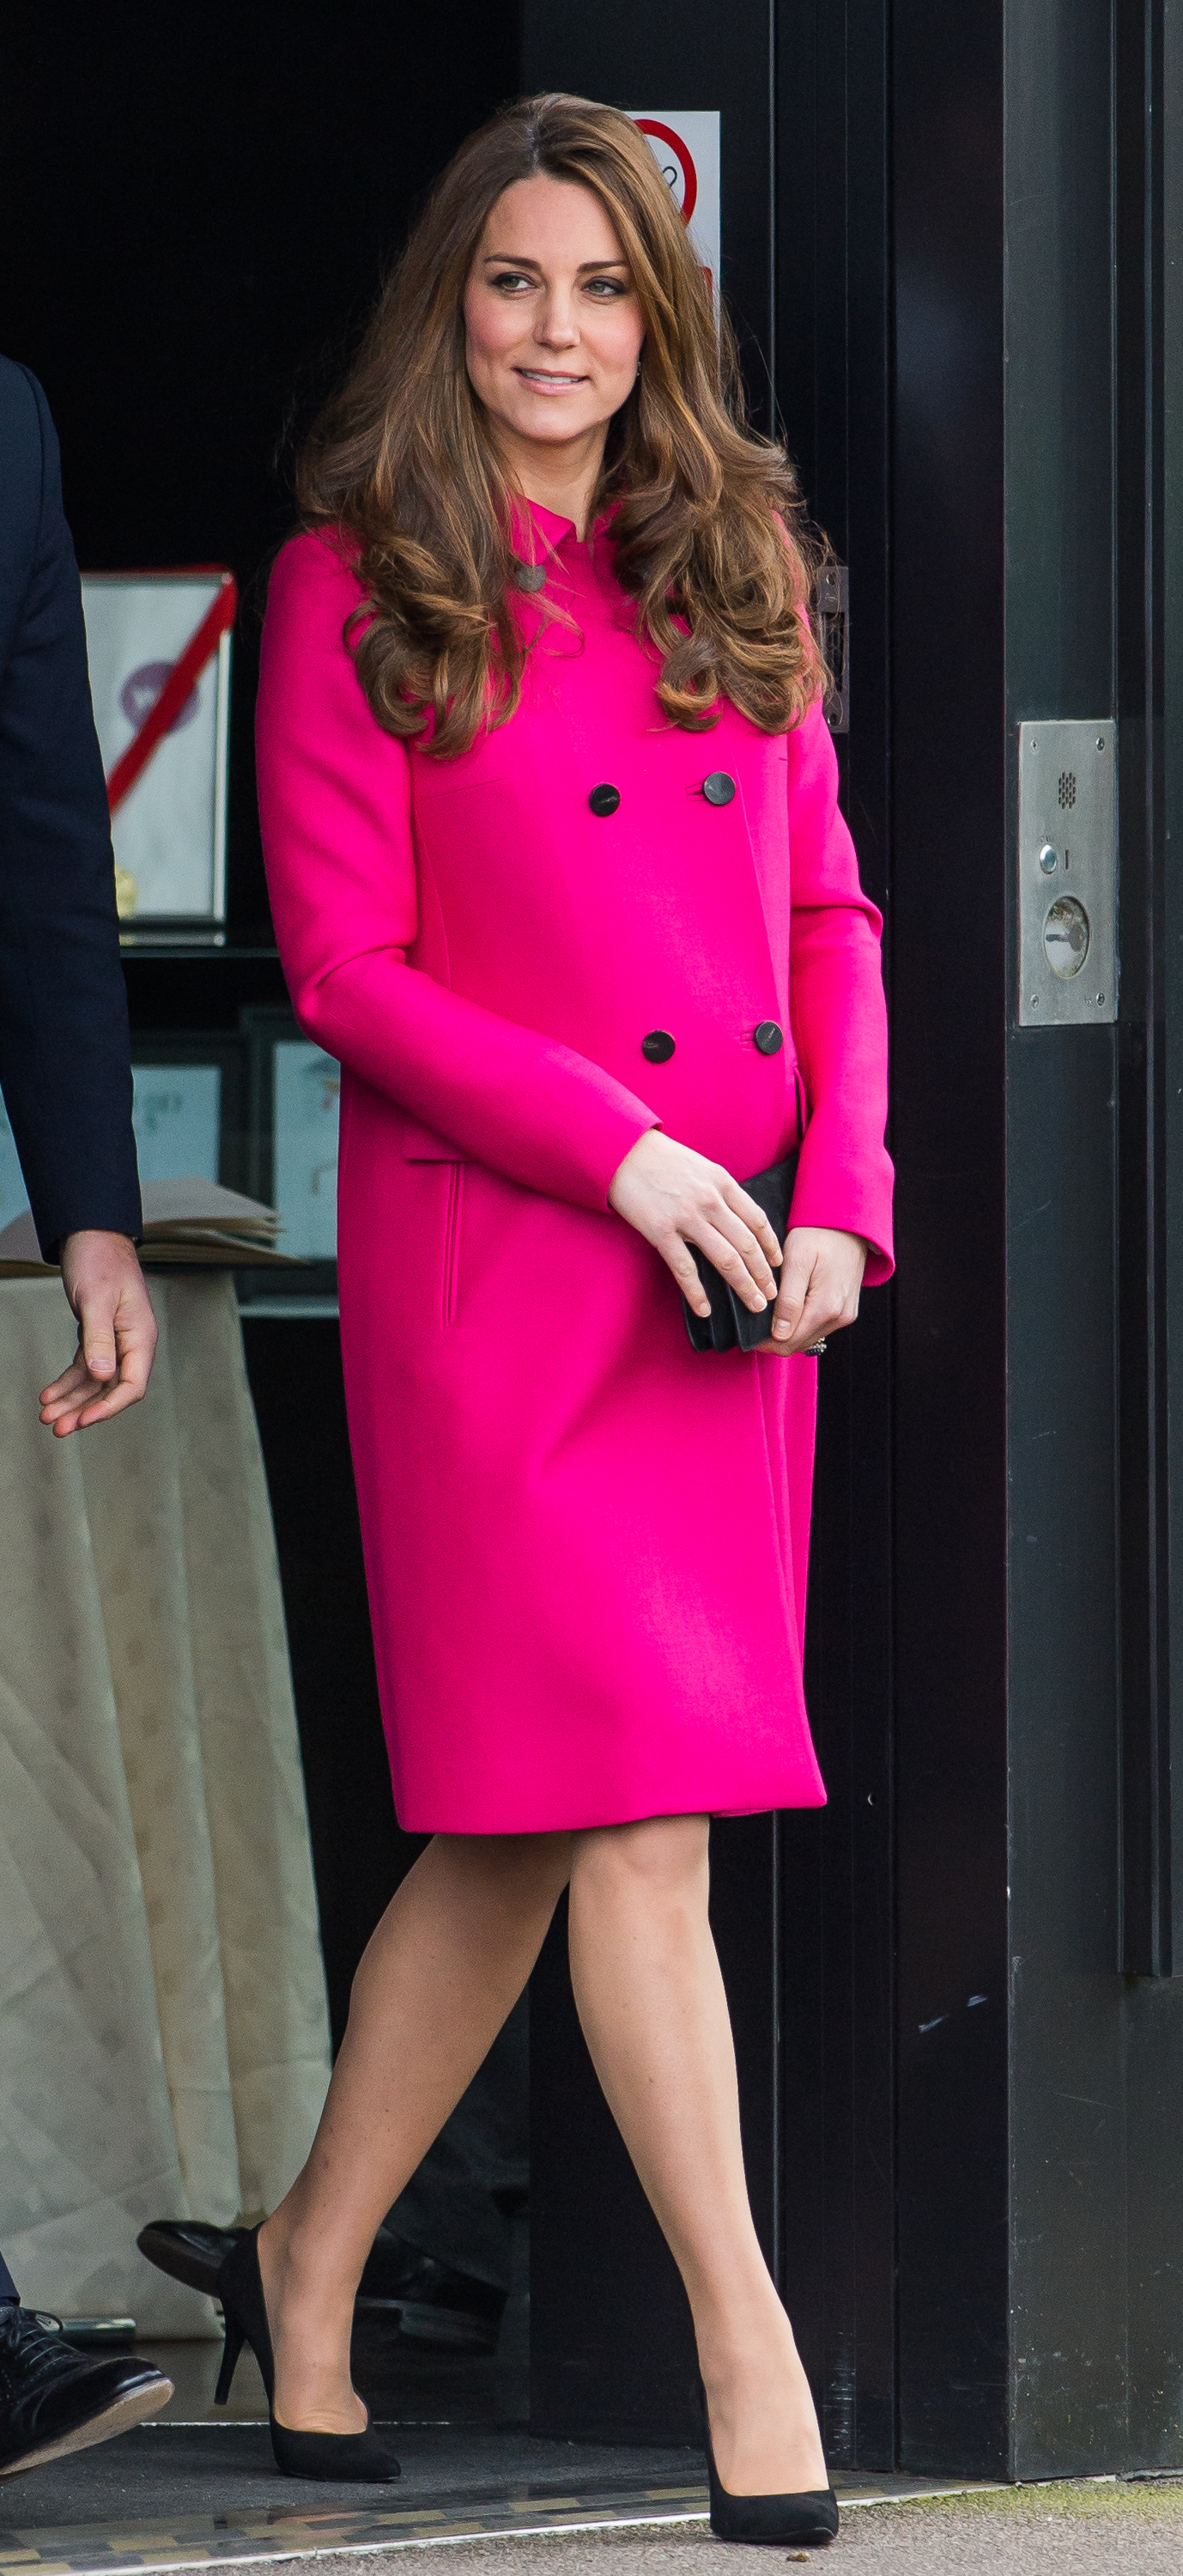 Princess Catherine at the Stephen Lawrence Centre in London on March 27, 2015. | Source: Getty Images